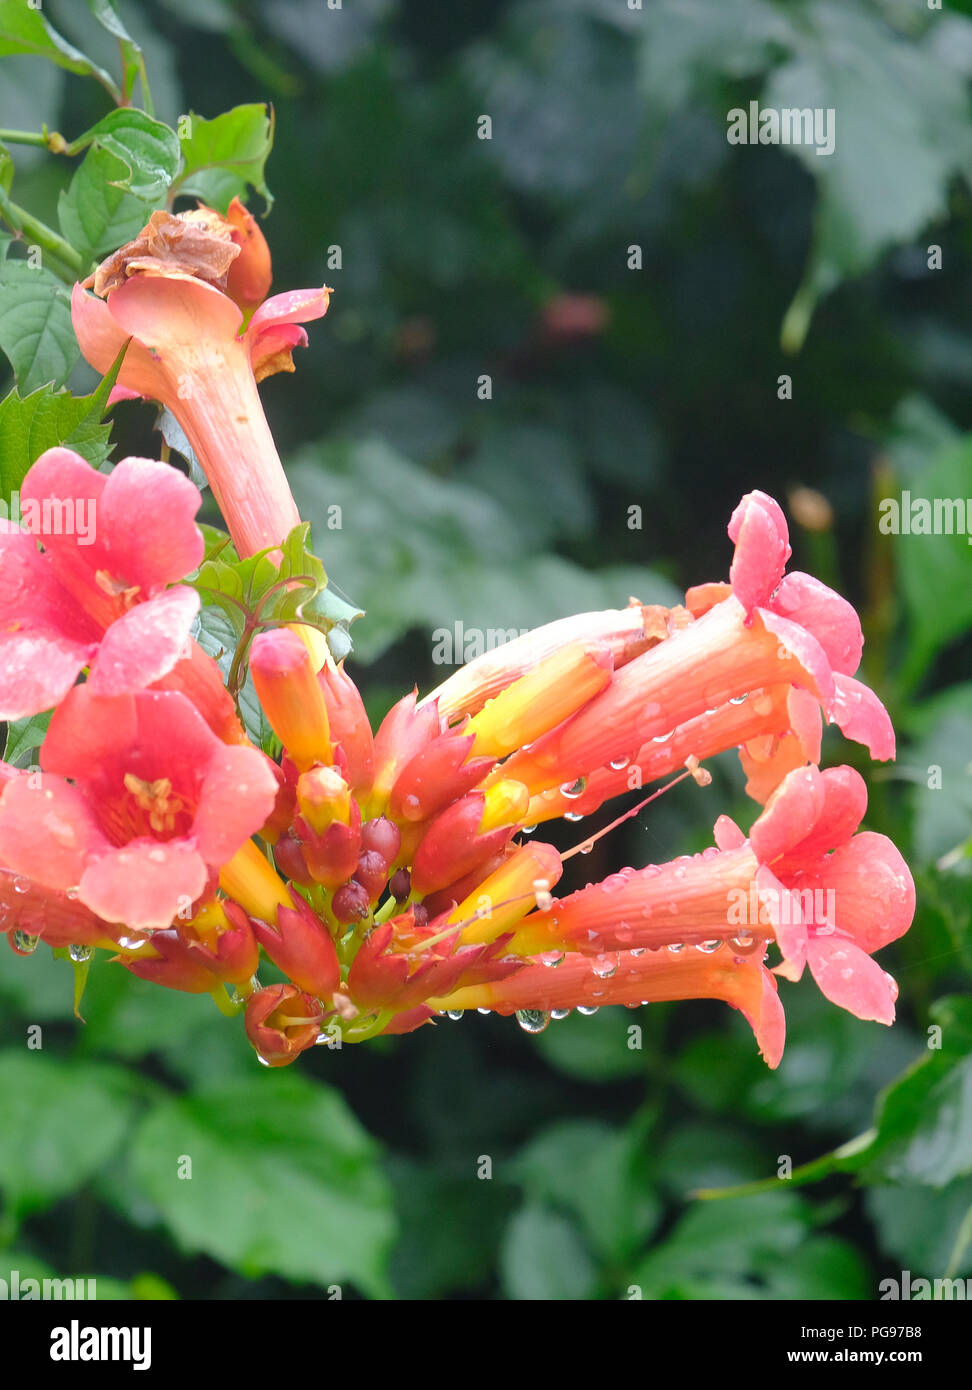 Orange red flowers of the Trumpet Vine (Campsis) after a rain shower Stock Photo